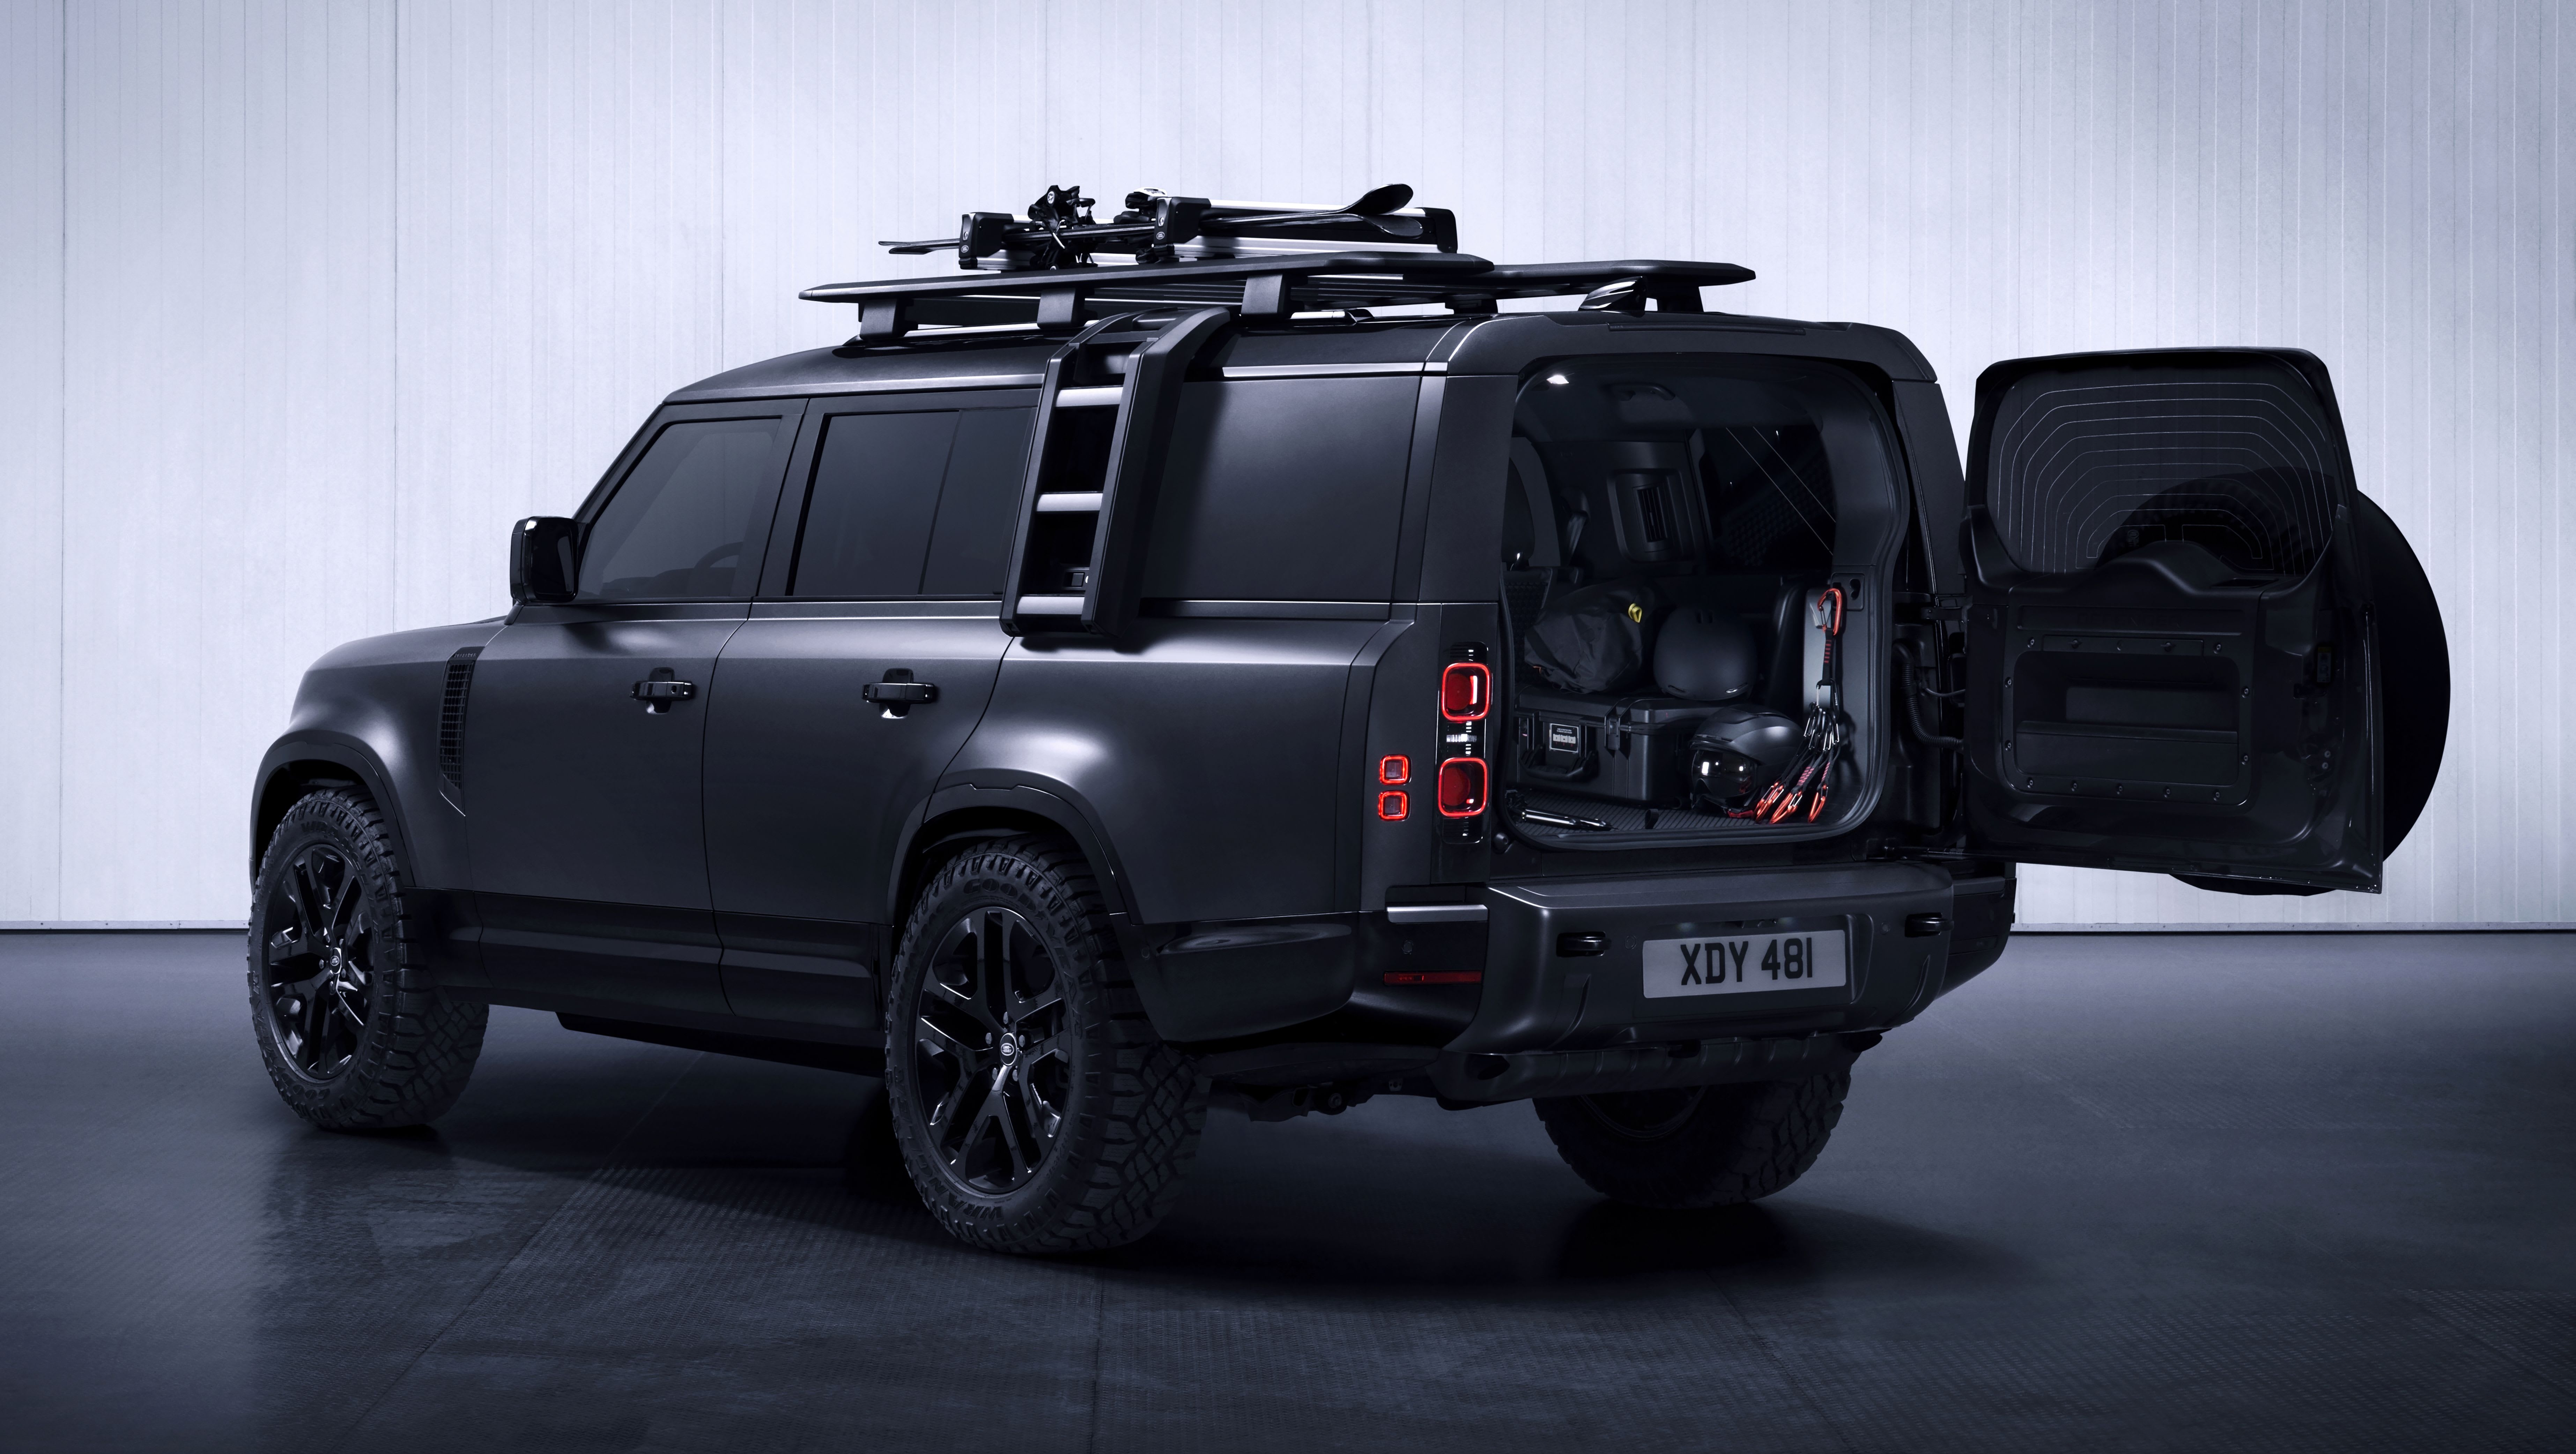 Defenders assemble! 2023 Land Rover Defender takes aim at Toyota LC300 and Lexus LX with new V8-powered flagship, extra-lux Outbound variant and plug-in hybrid option - Car News | CarsGuide